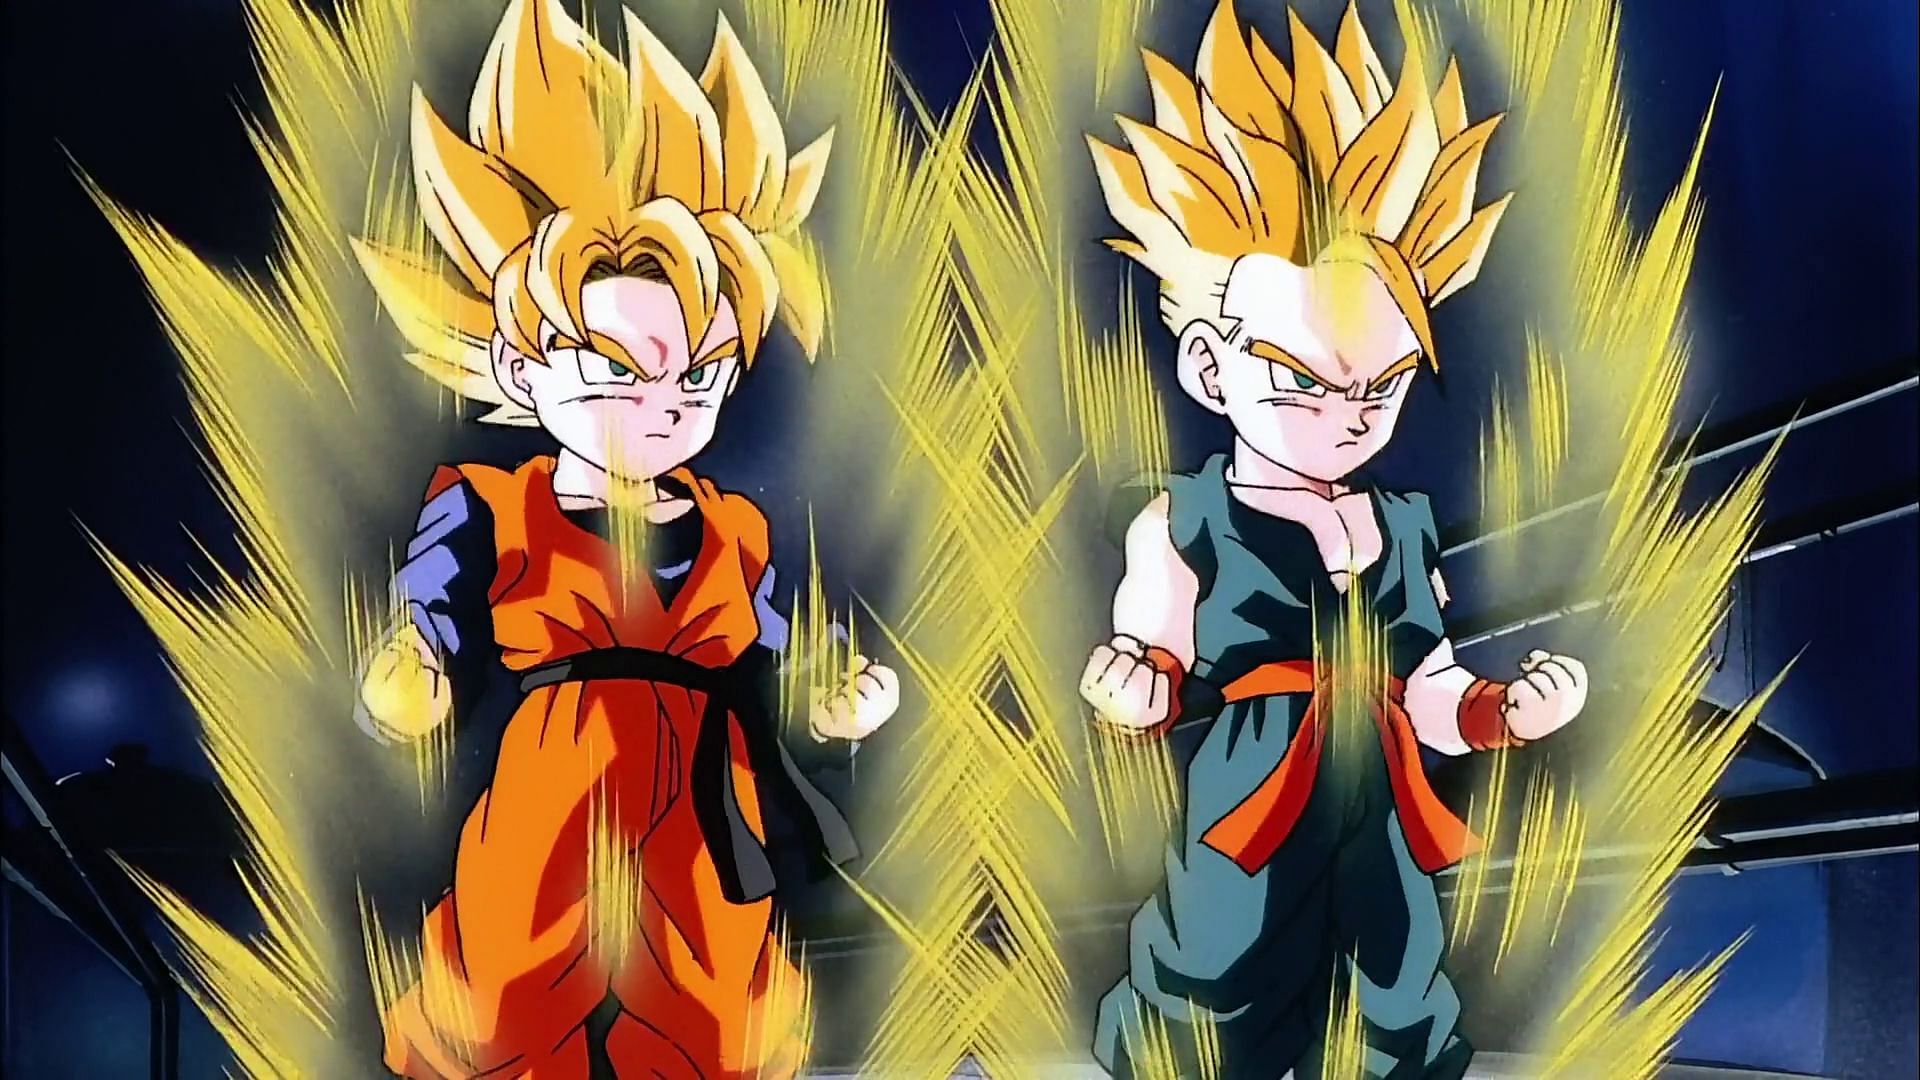 Goten (left) and Trunks (right) are two characters who have not unlocked their true potential (Image via Toei Animation)